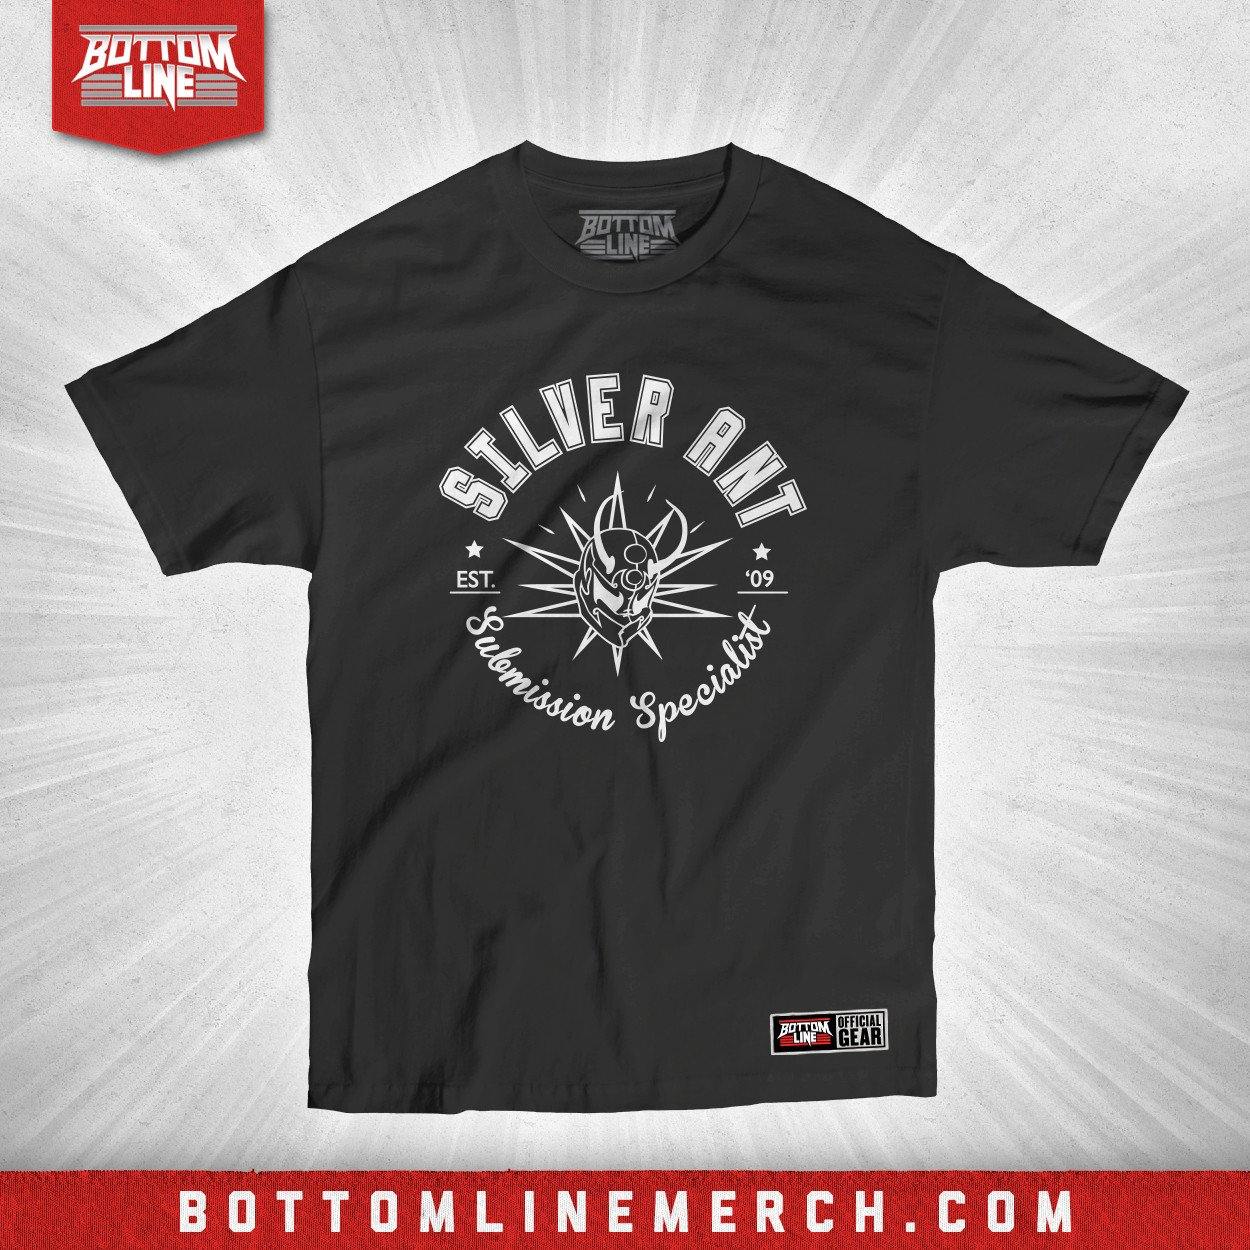 Buy Now – Silver Ant "Submission Specialist" Shirt – Wrestler & Wrestling Merch – Bottom Line